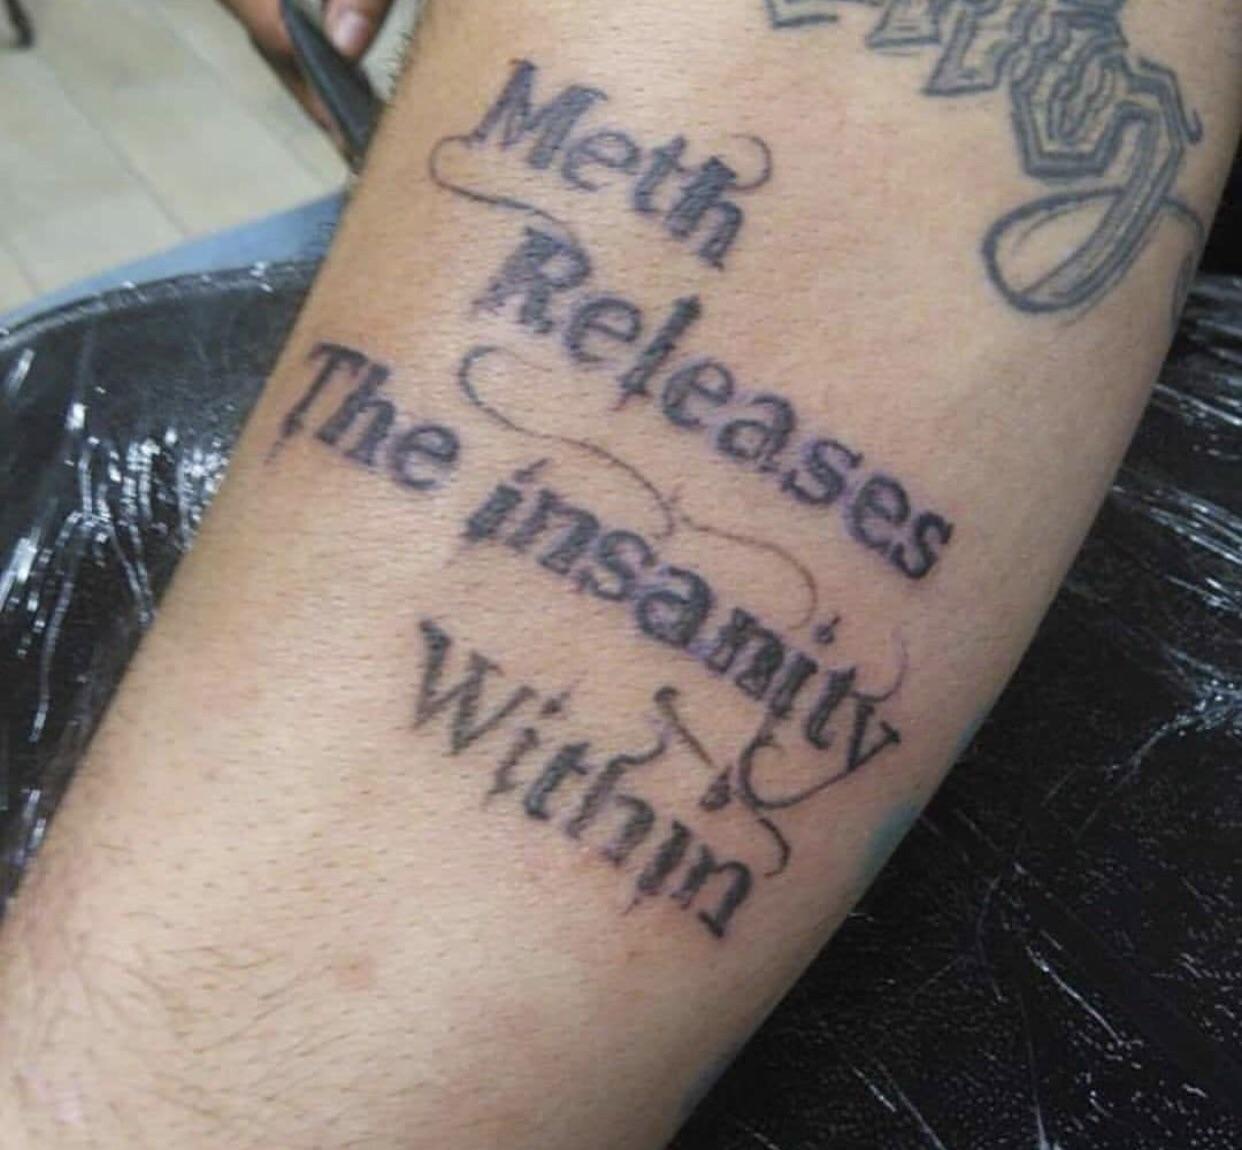 insanity tattoo - Meth Releases The insanity Within